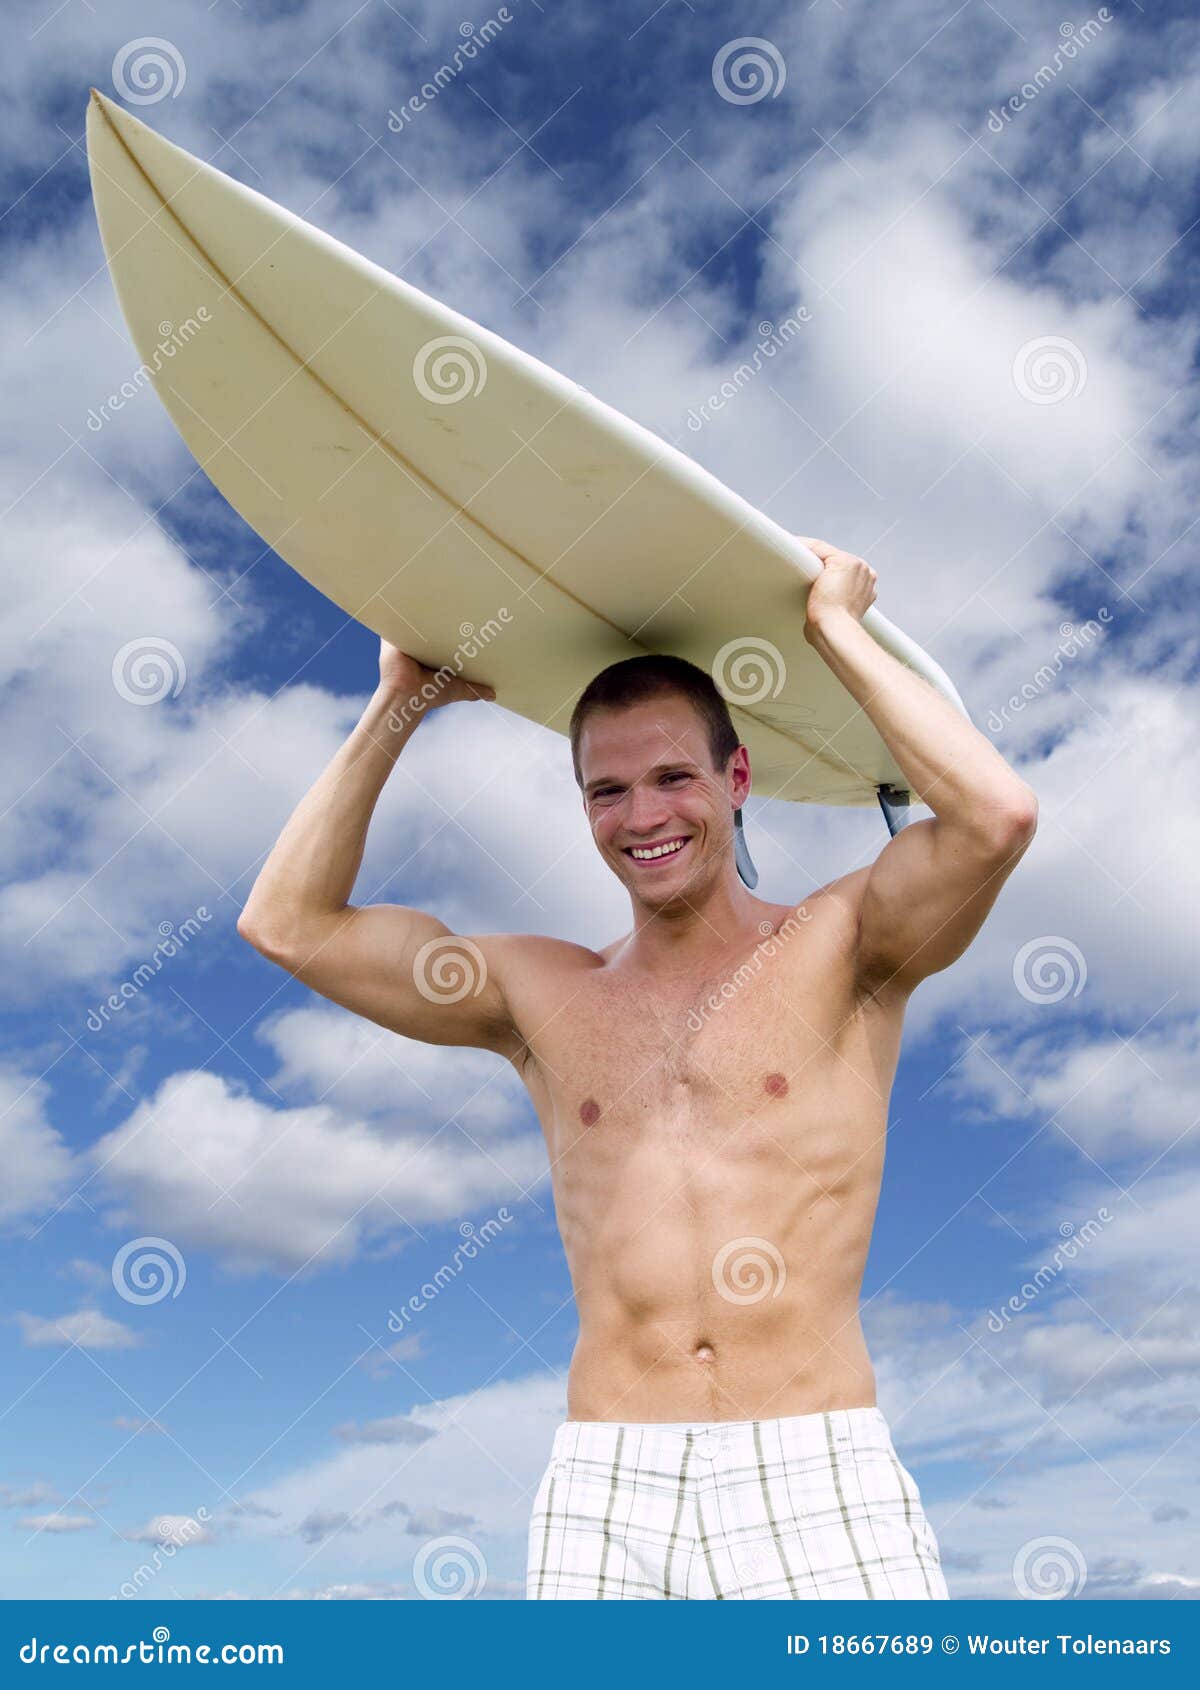 Muscular surfer dude stock image. Image of recreation - 18667689